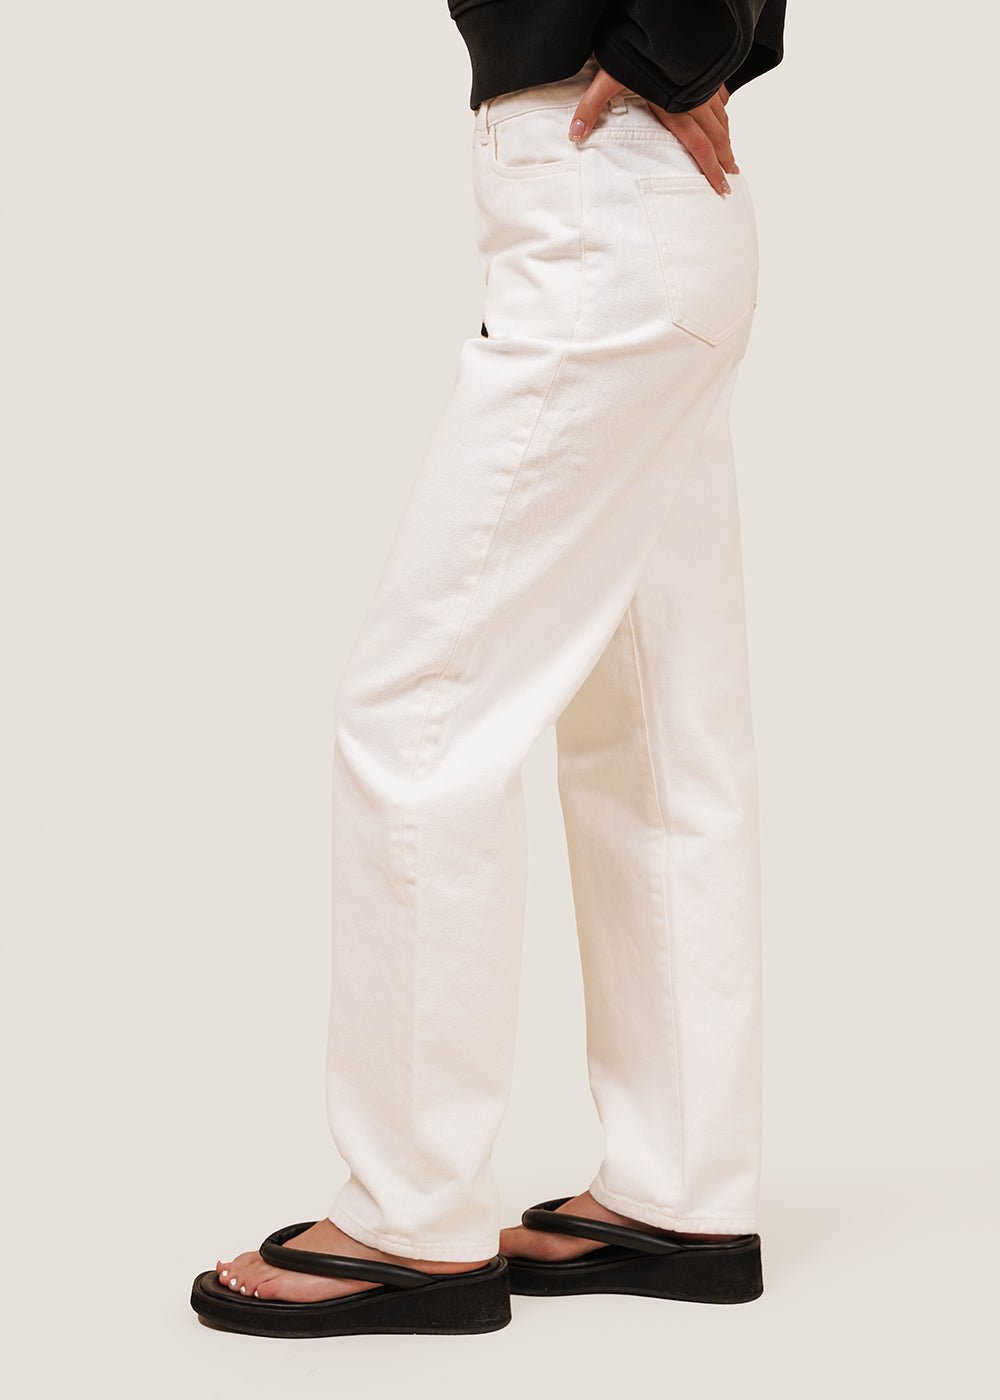 AMOMENTO White Recycled Cotton Denim Jeans - New Classics Studios Sustainable Ethical Fashion Canada